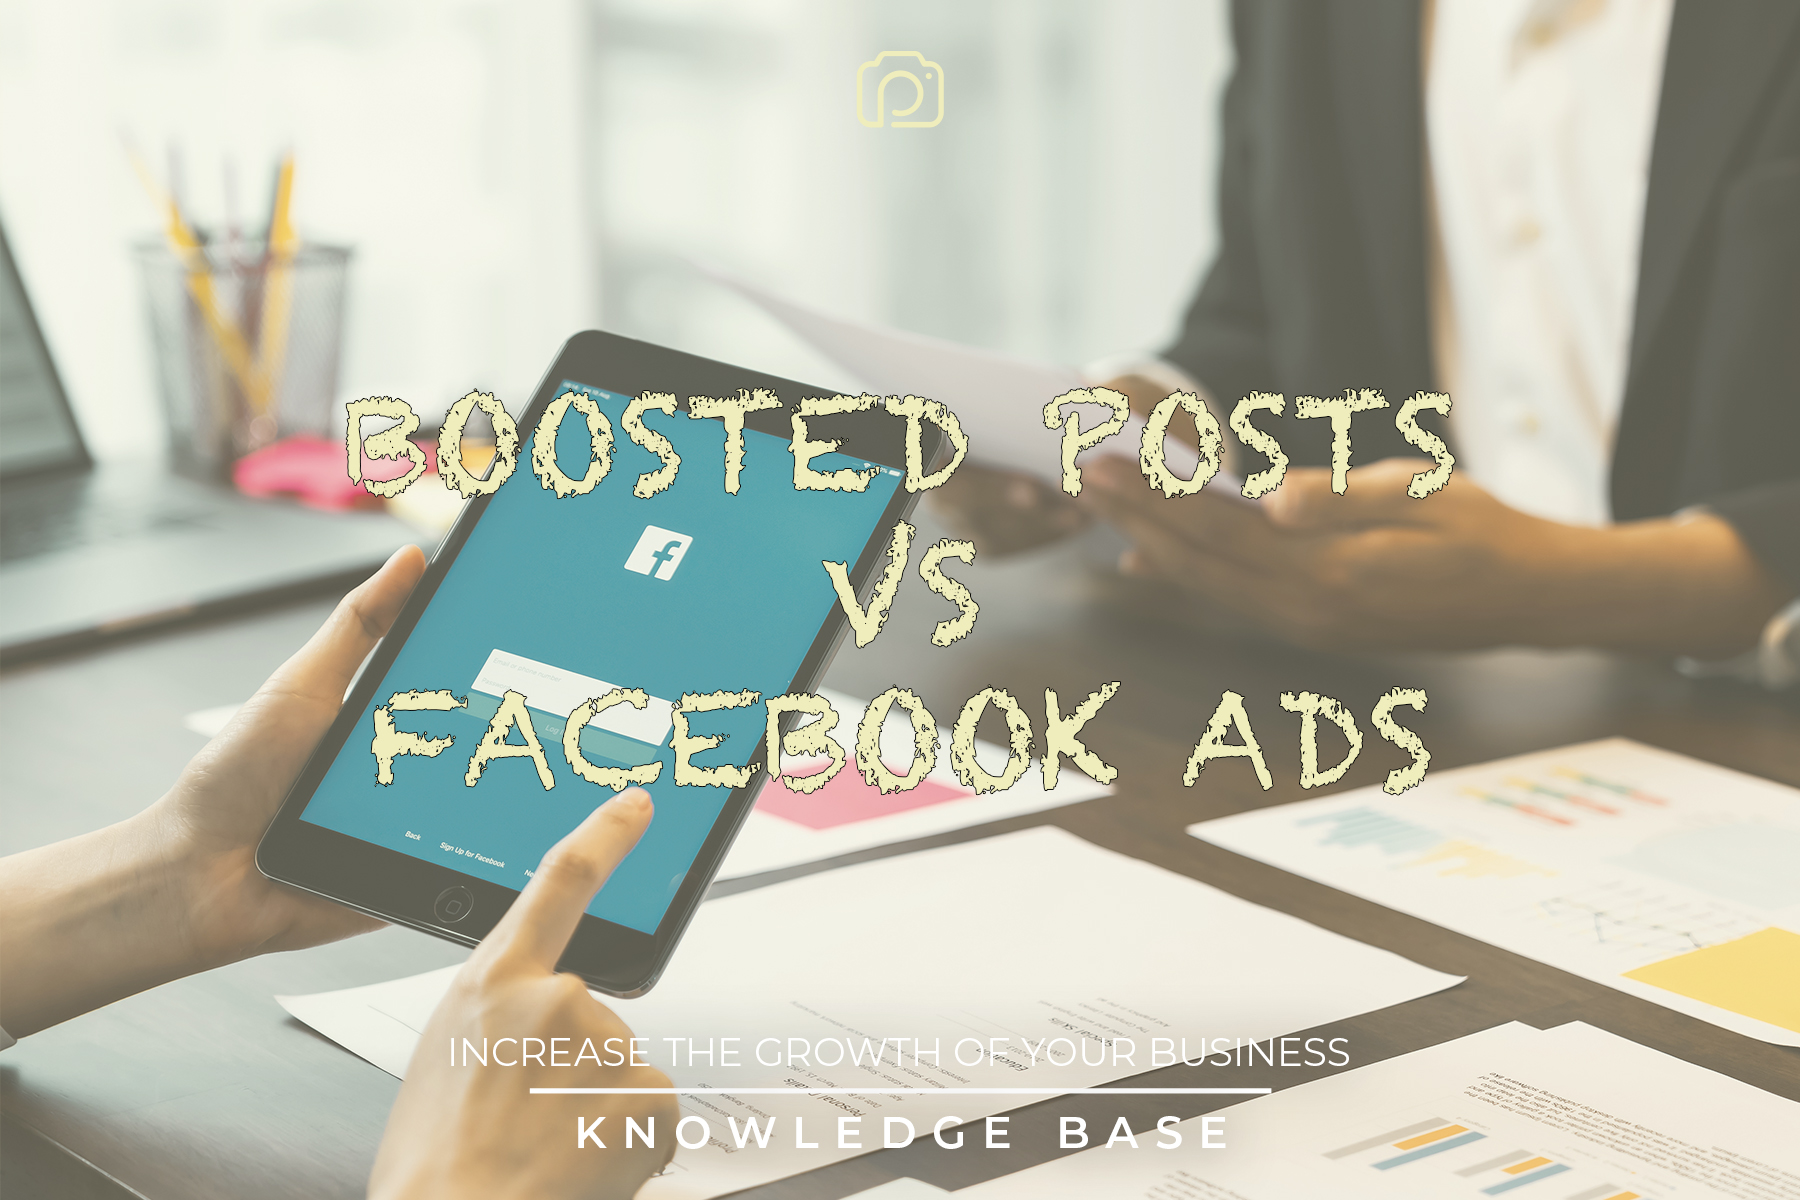 Which should you use: boosted posts or Facebook ads?